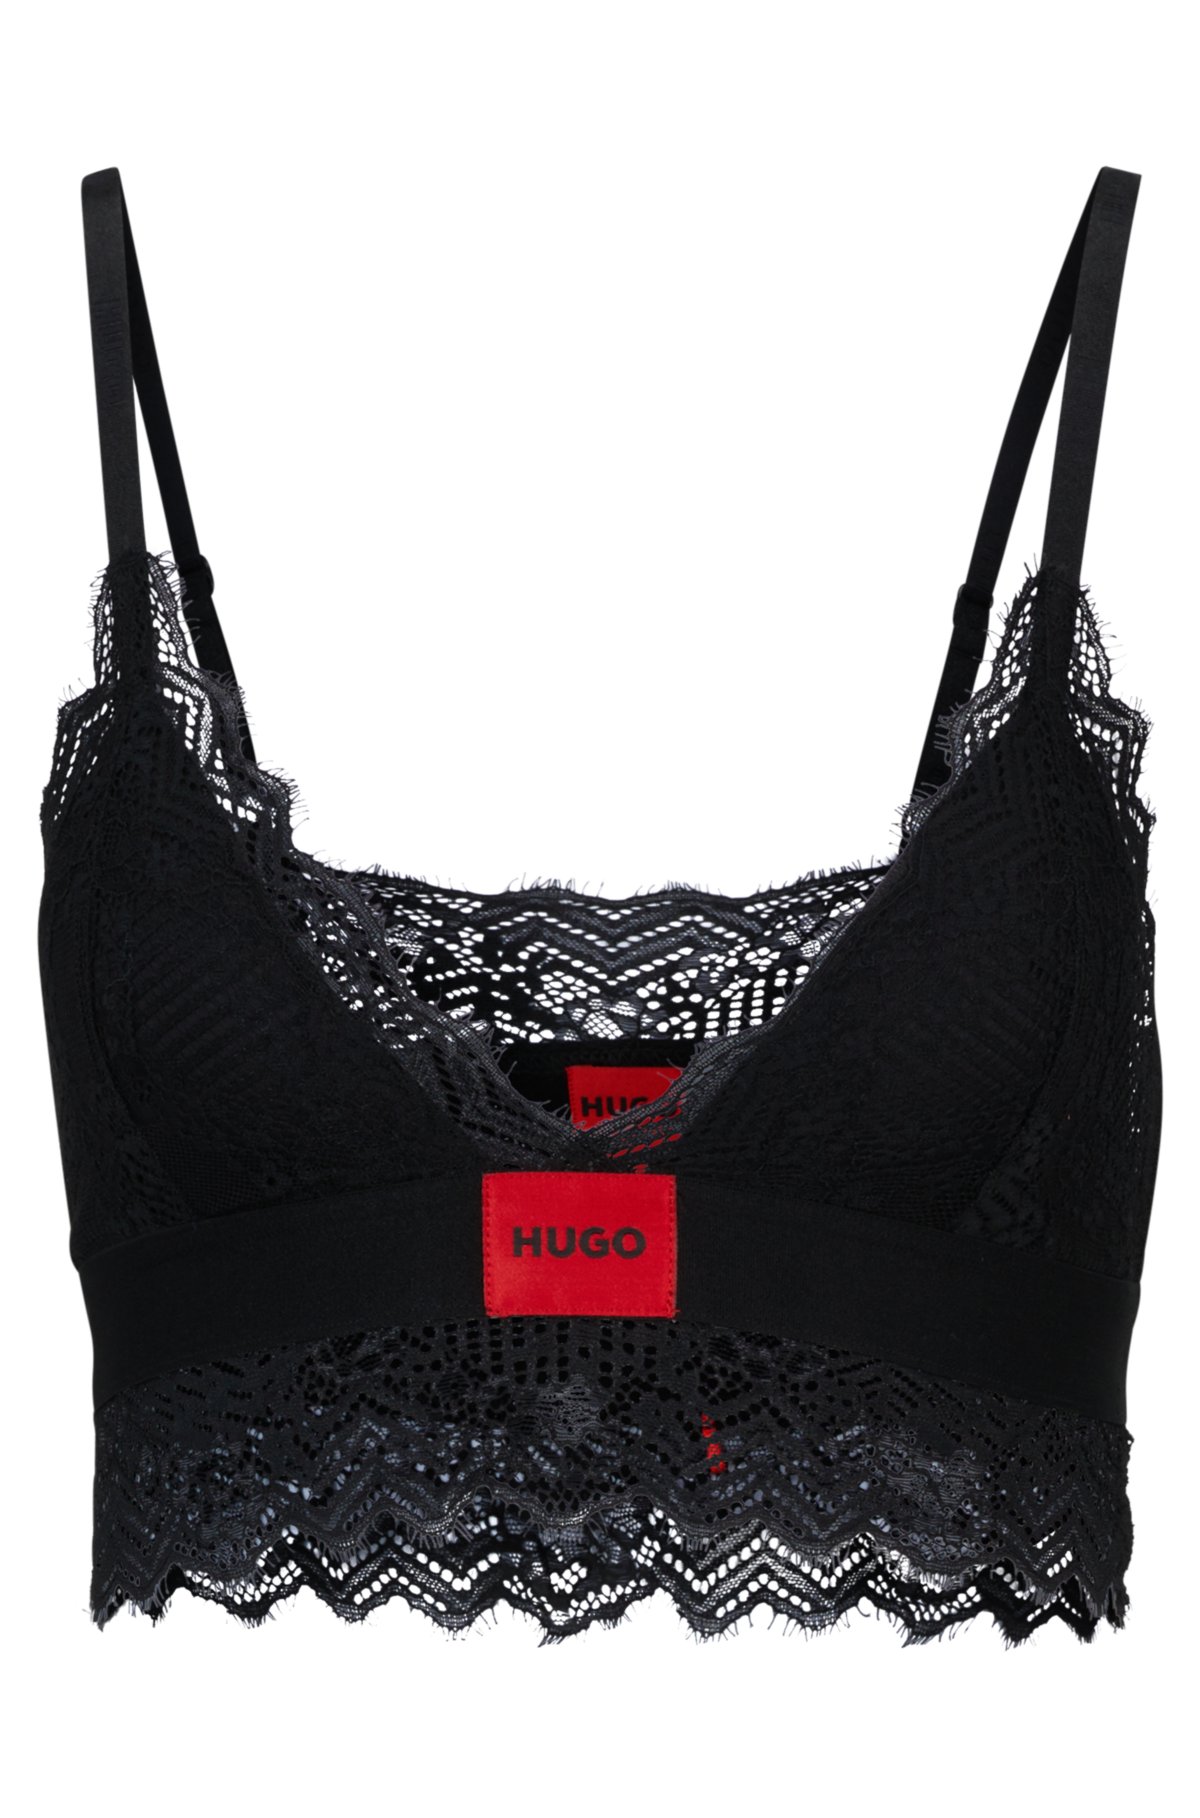 Padded triangle bra in geometric lace with logo label, Black